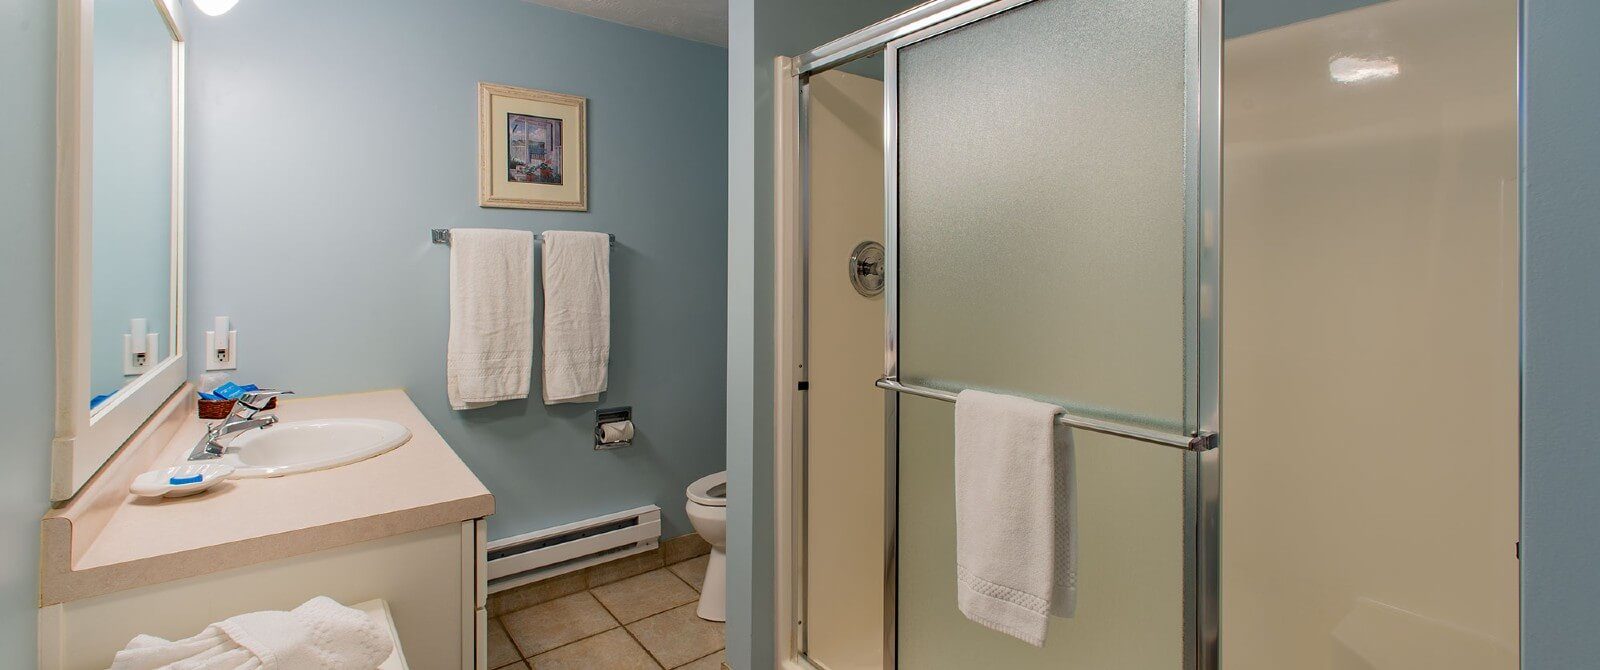 Bathroom with shower with sliding glass doors, sink, toilet, large framed mirror and hanging white towels